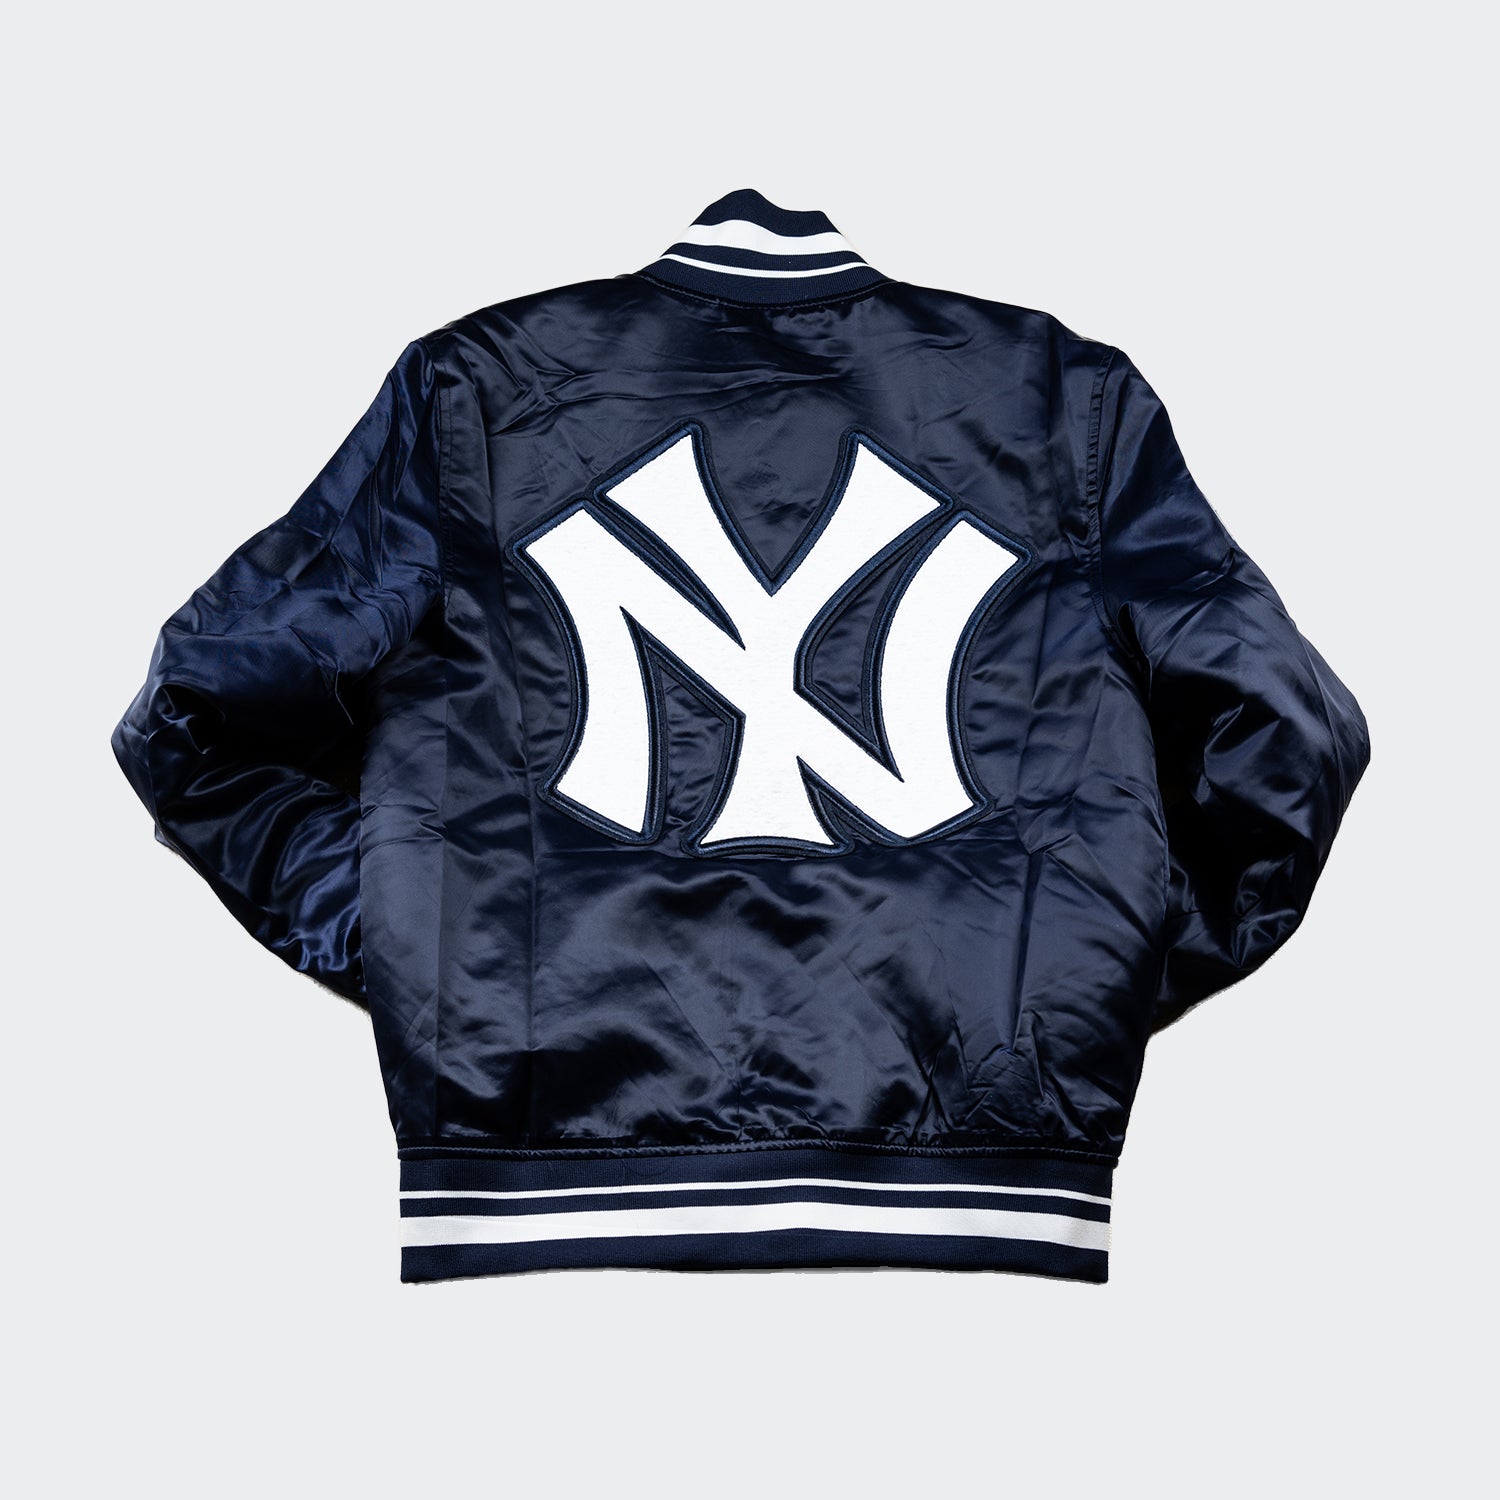 1927 REPLICA NEW YORK YANKEES MITCHELL & NESS JACKET - NEW W/TAGS -  HIGH QUALITY